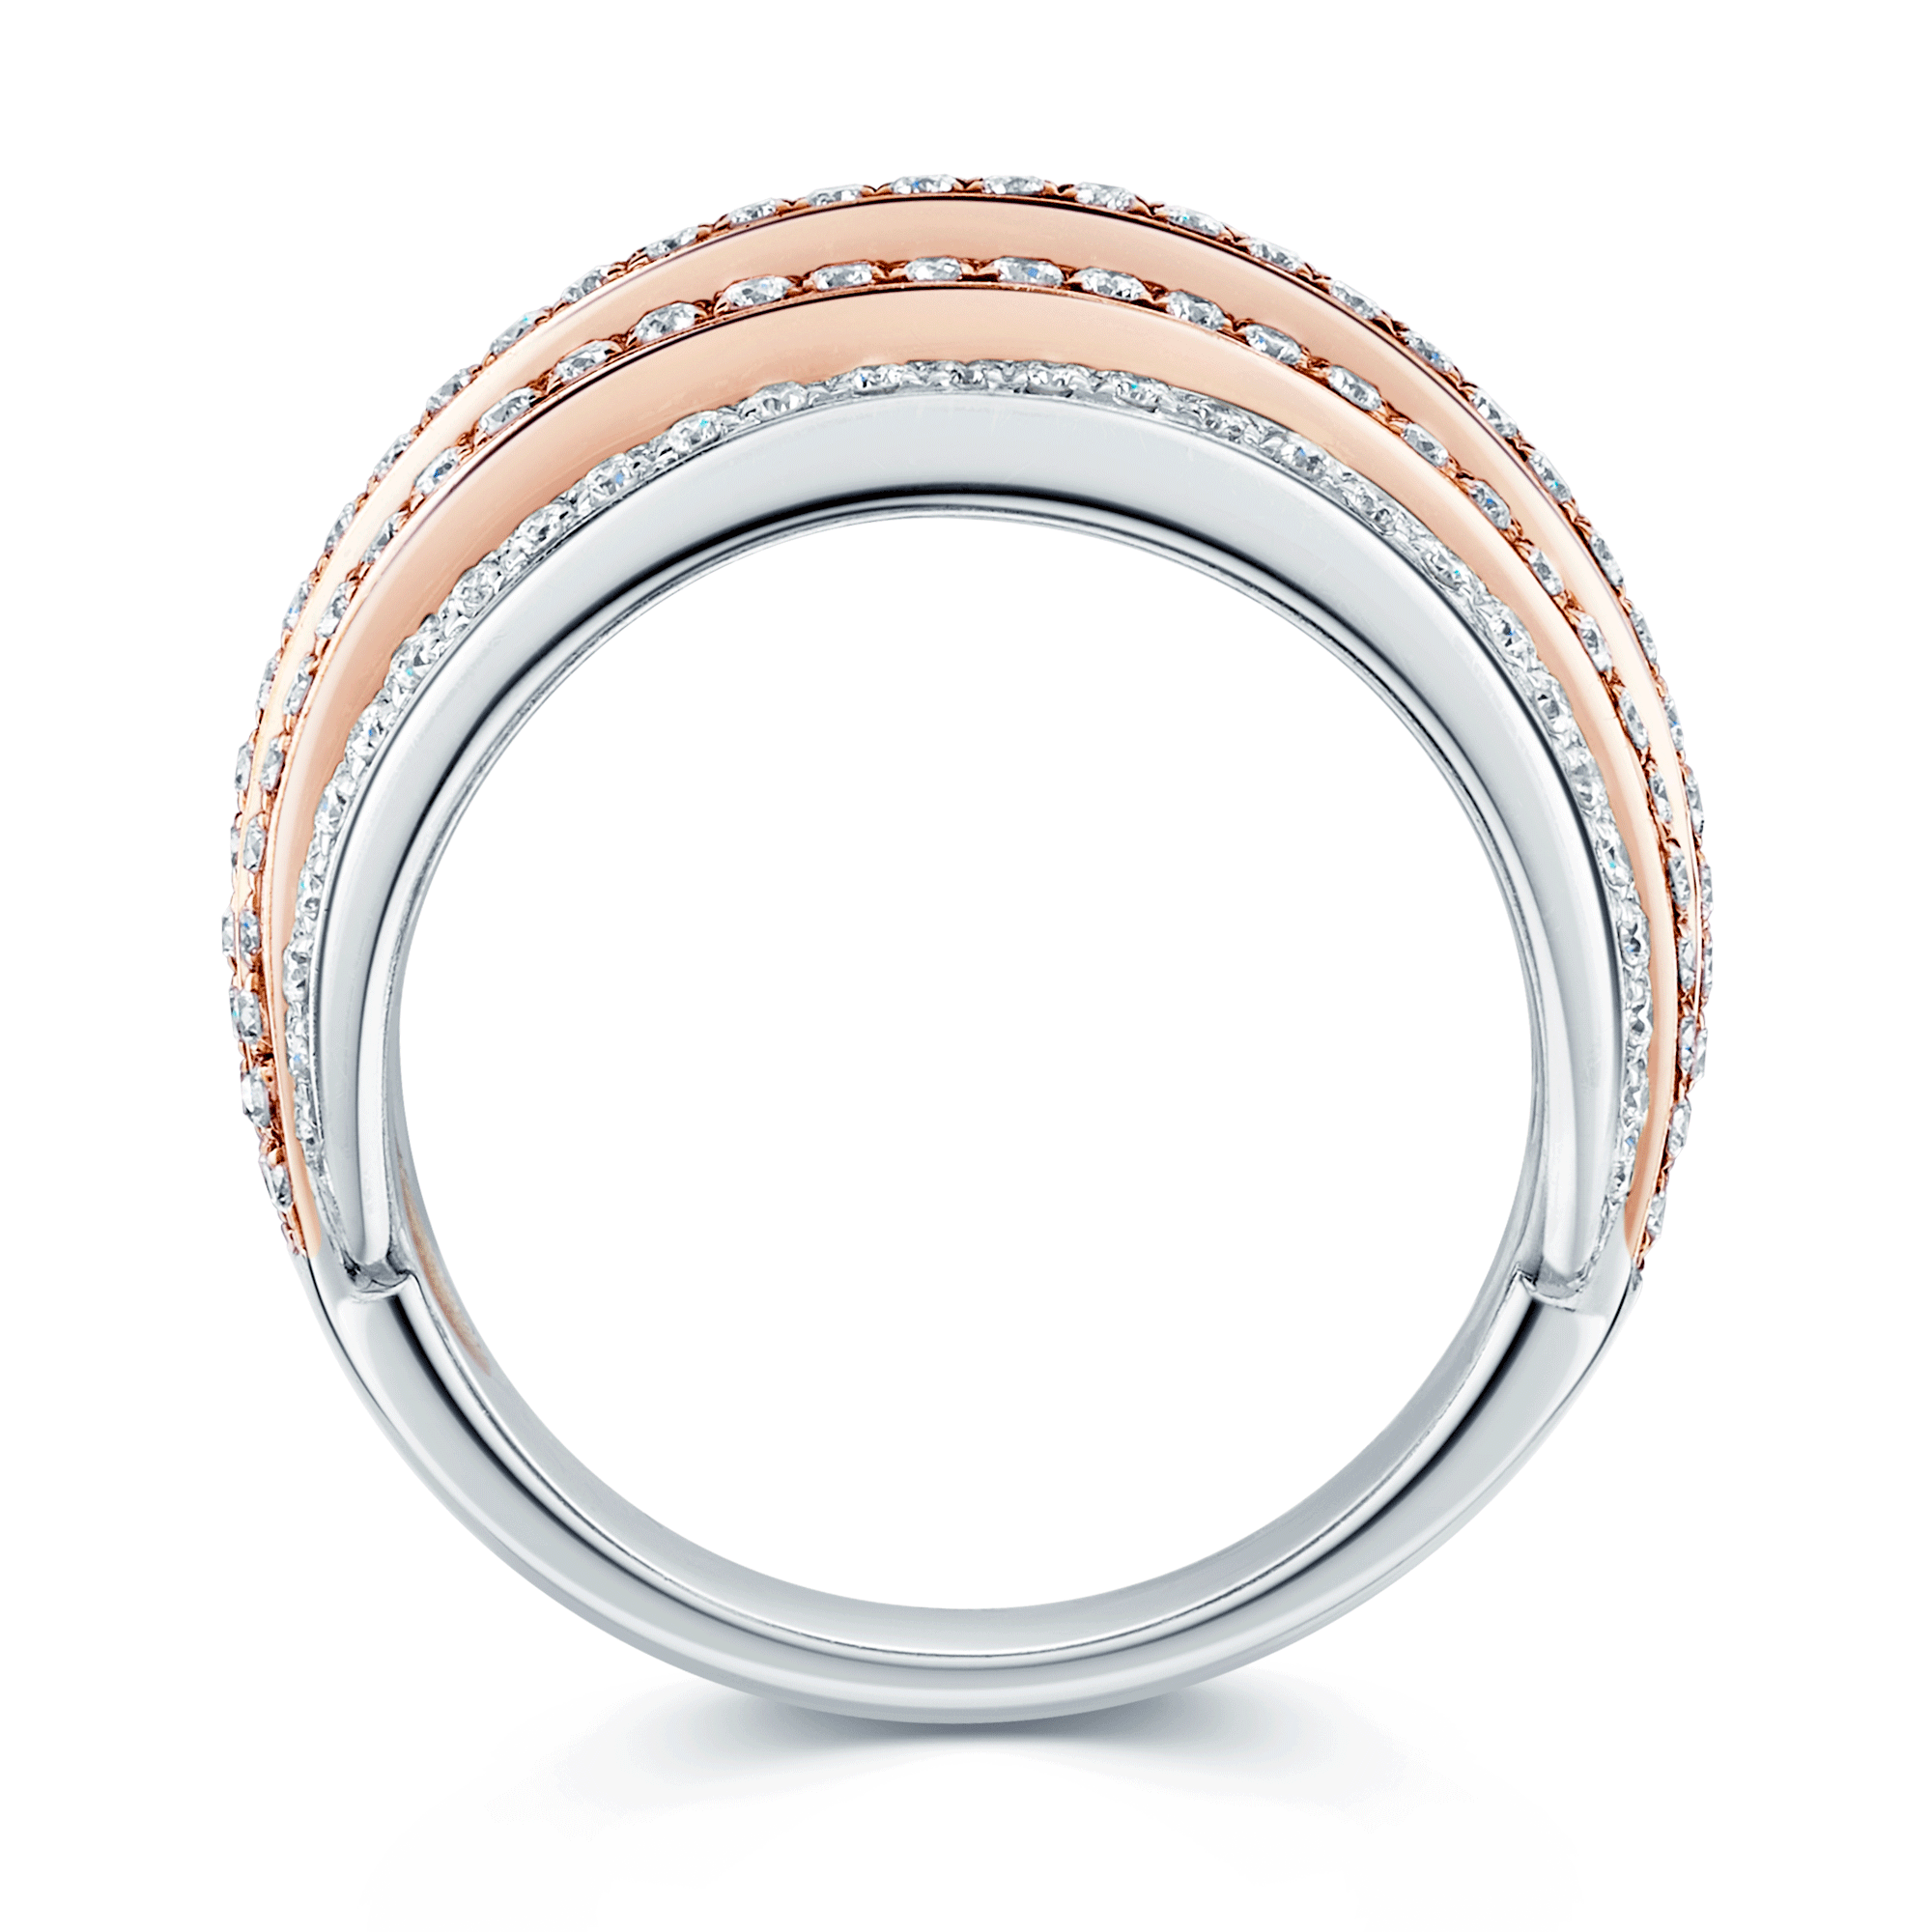 18ct White And Rose Gold Diamond Five Strand Dress Ring